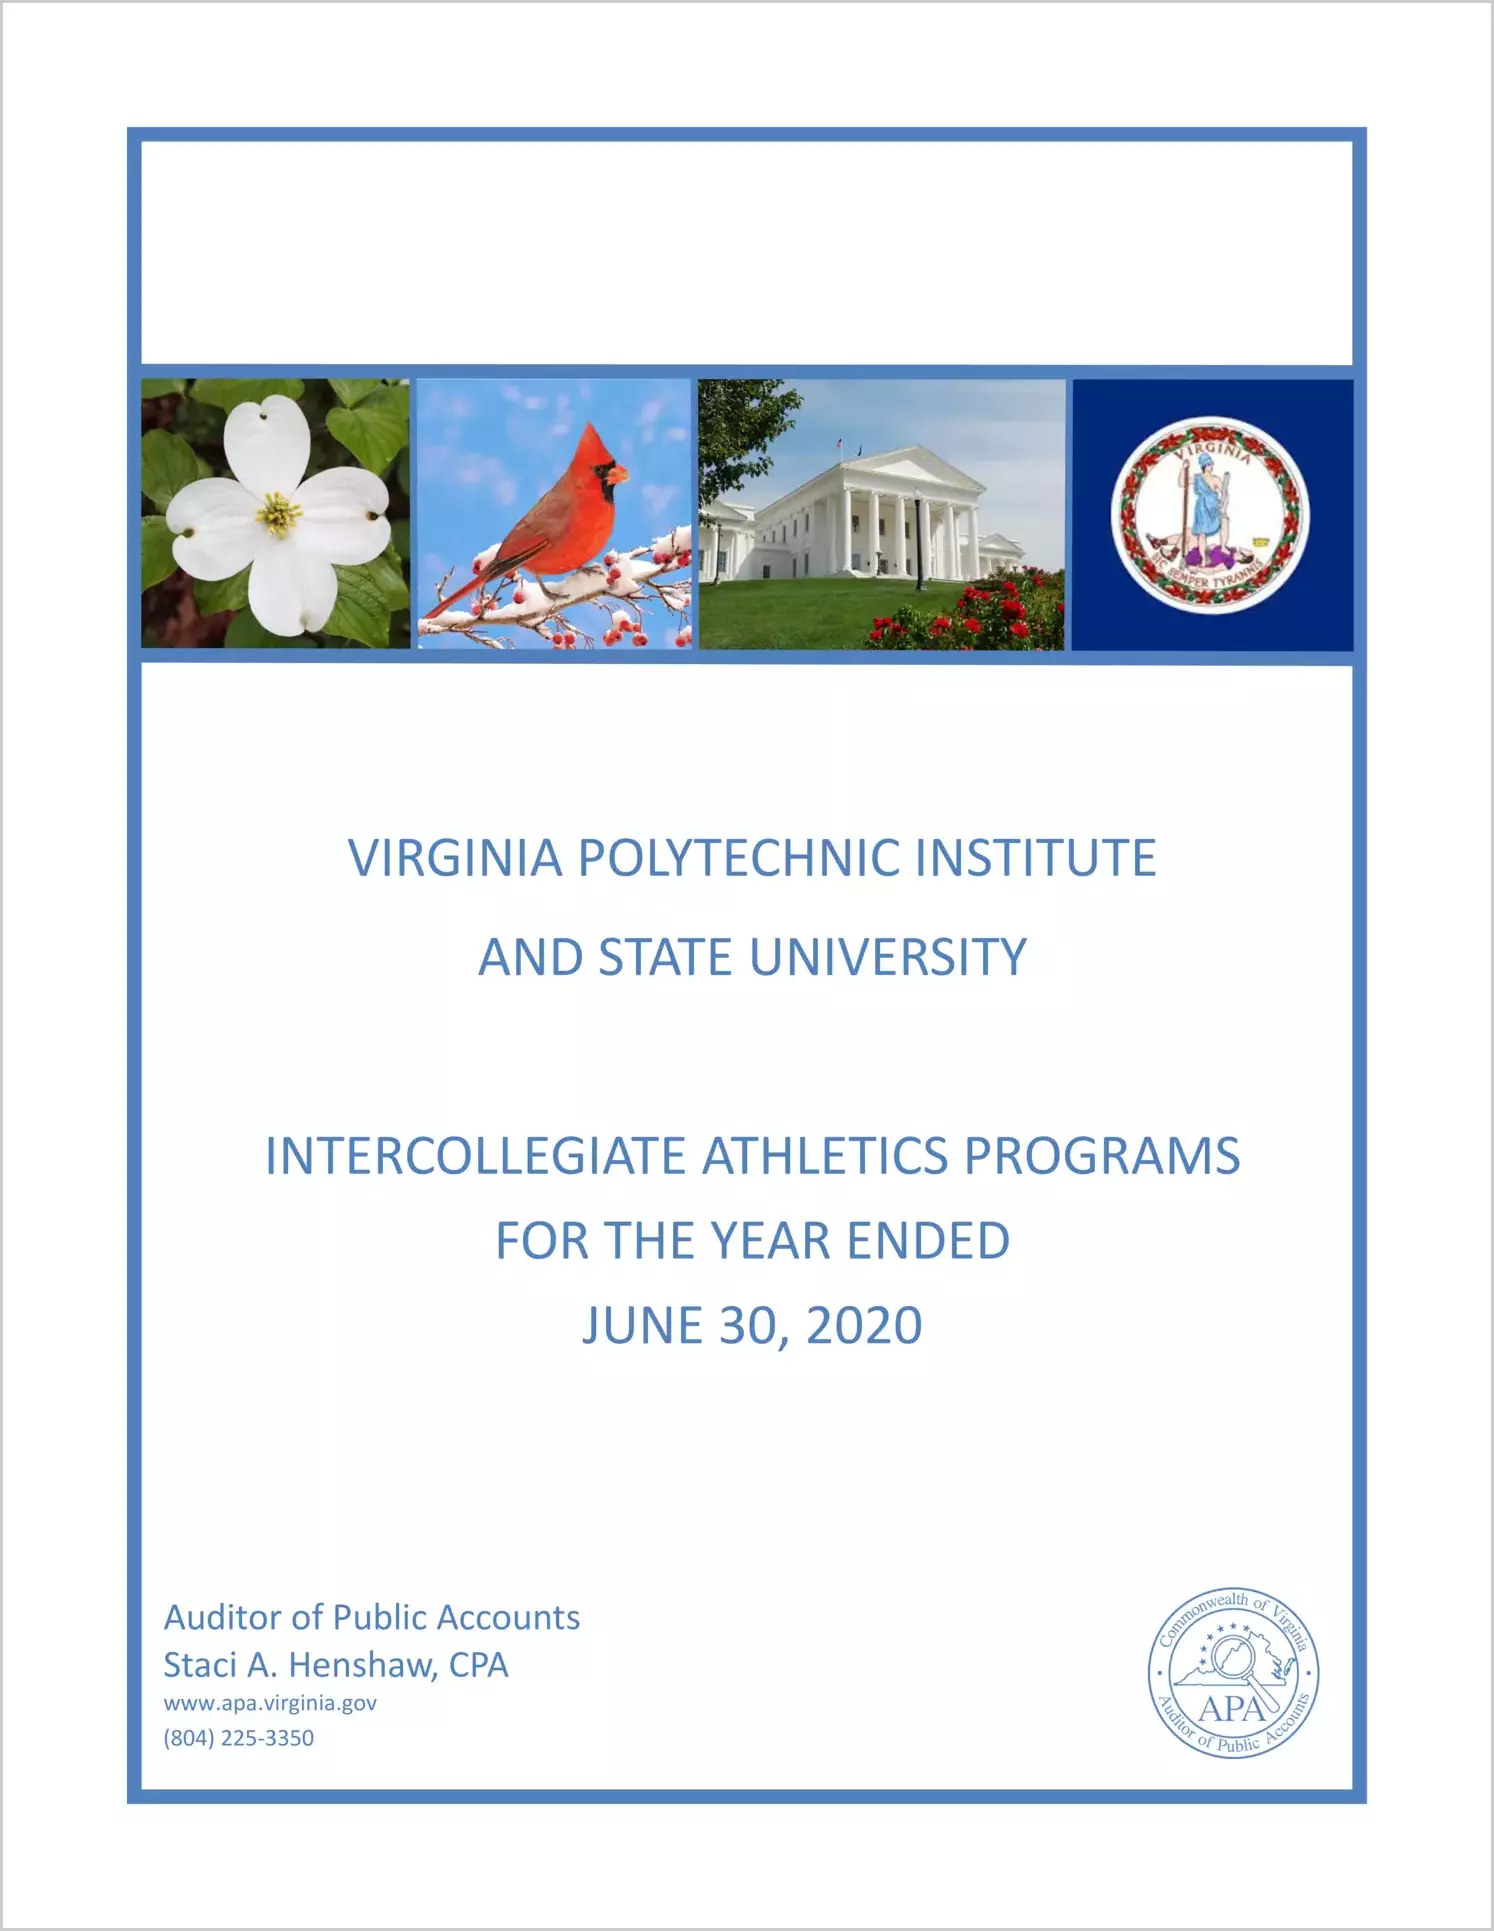 Virginia Polytechnic Institute and State University Intercollegiate Athletics Programs for the year ended June 30, 2020